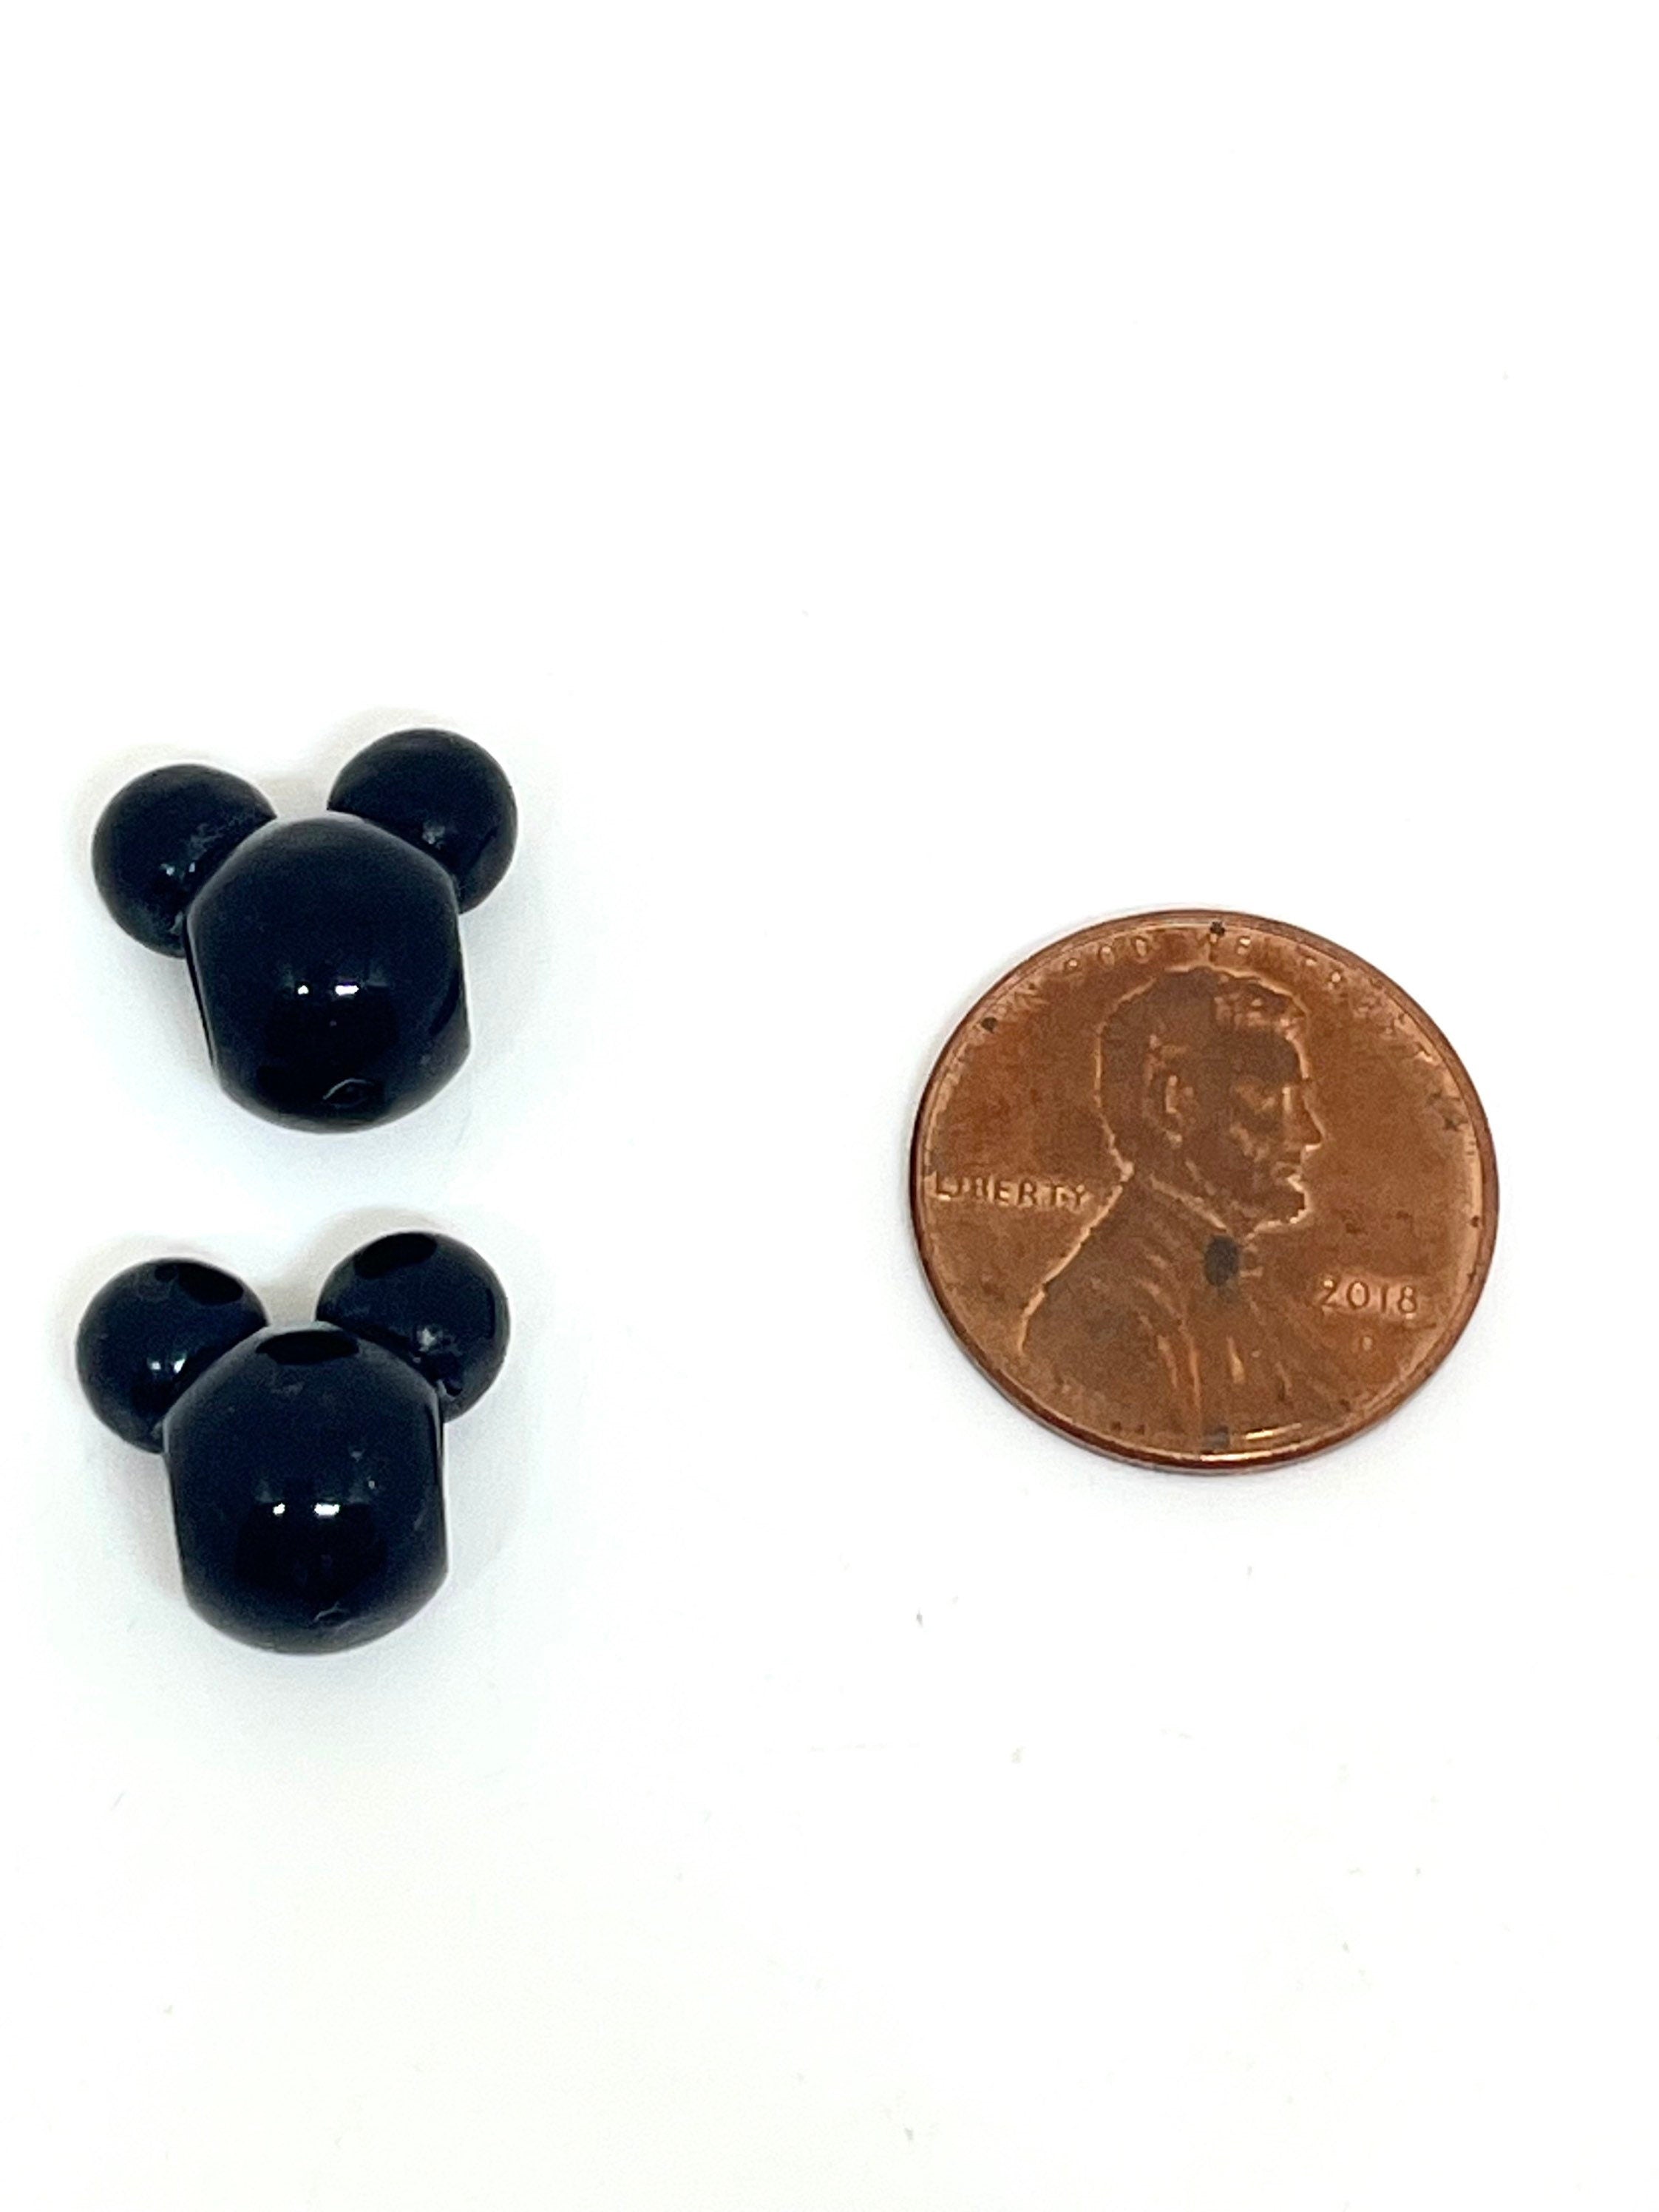 Black Mickey Mouse Beads - Ideal for Disney-Themed Jewelry Creations